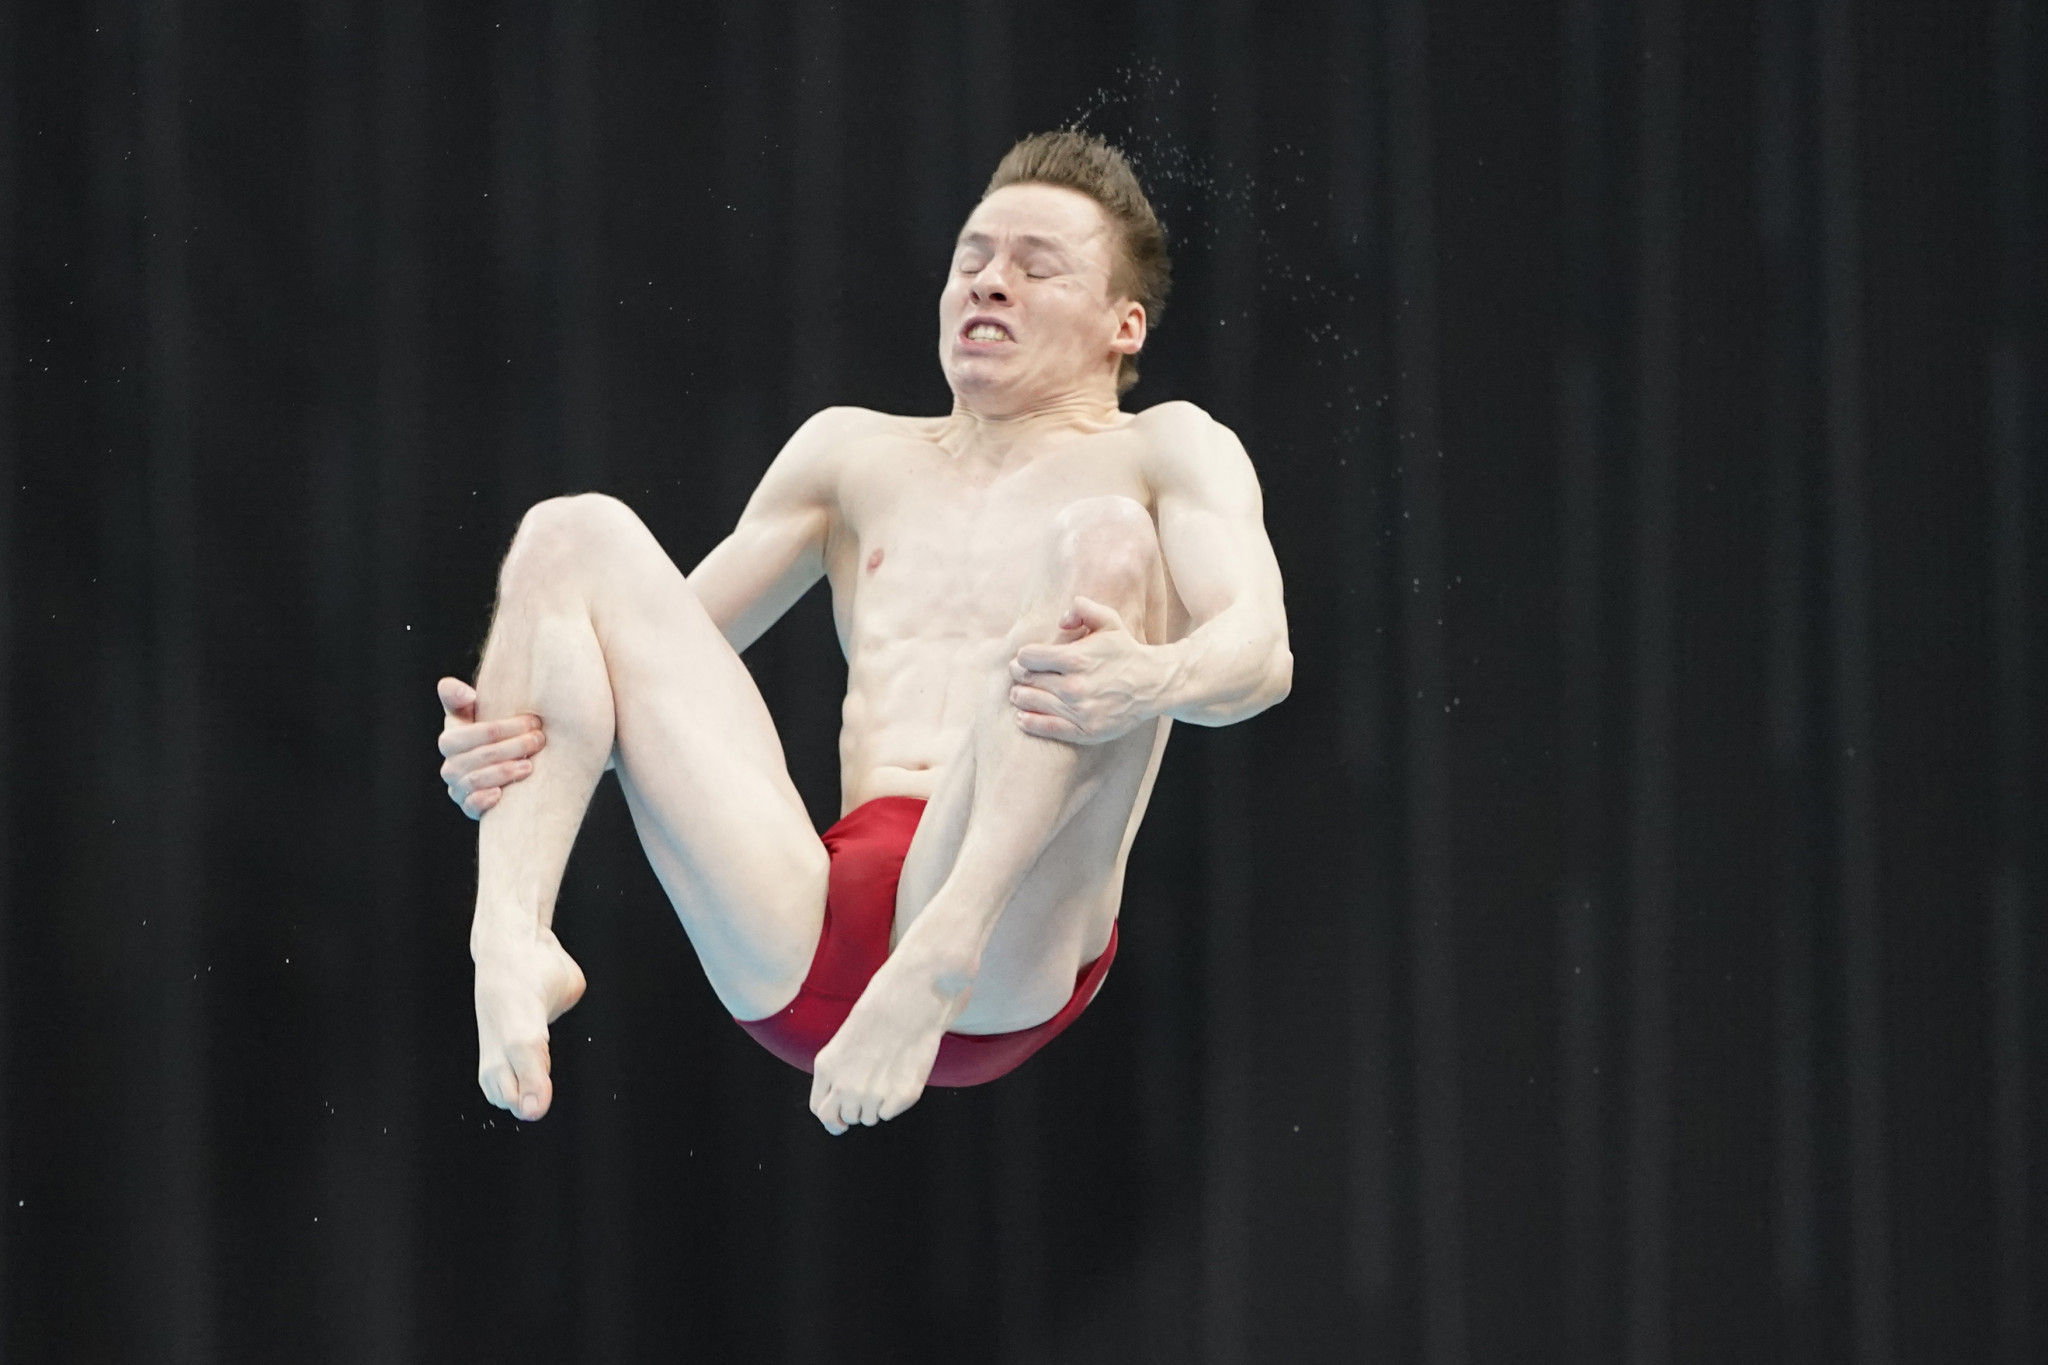 Germany's Martin Wolfram halted the British men's gold rush at the FINA Diving World Cup in Tokyo ©Getty Images